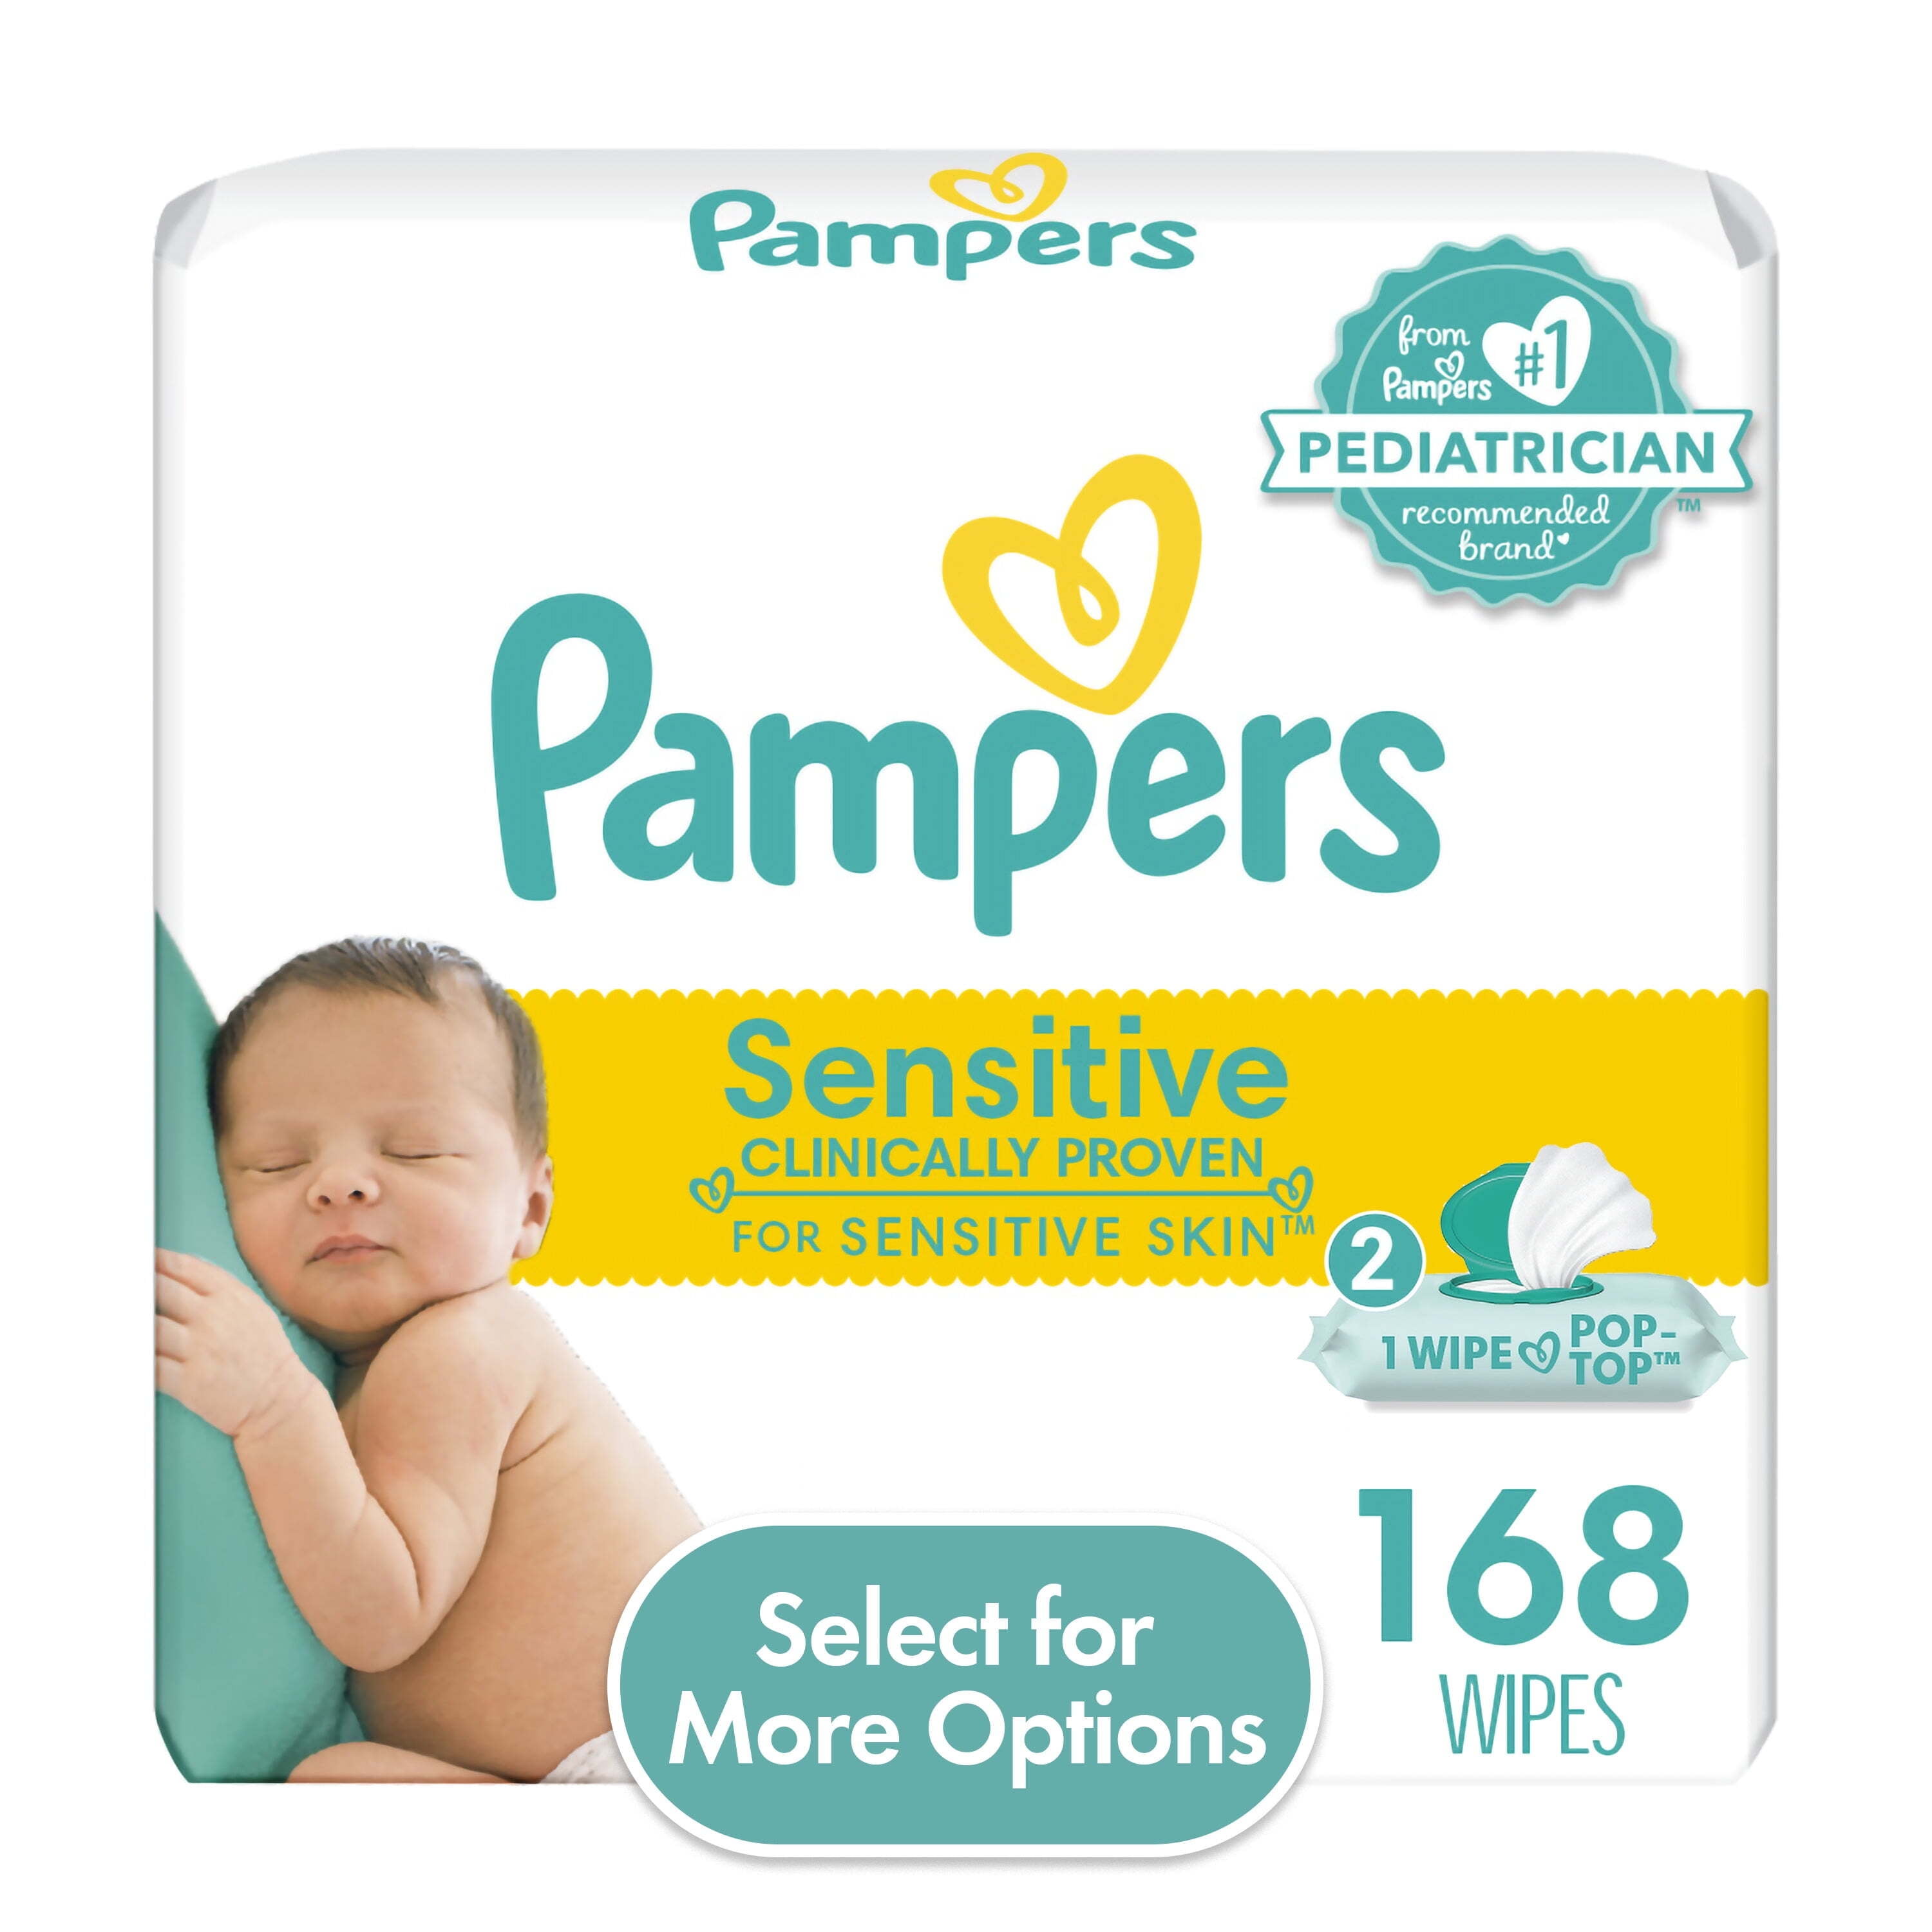 Pampers Sensitive Baby Wipes 2X Flip-Top Pack 168 Wipes (Select for ...